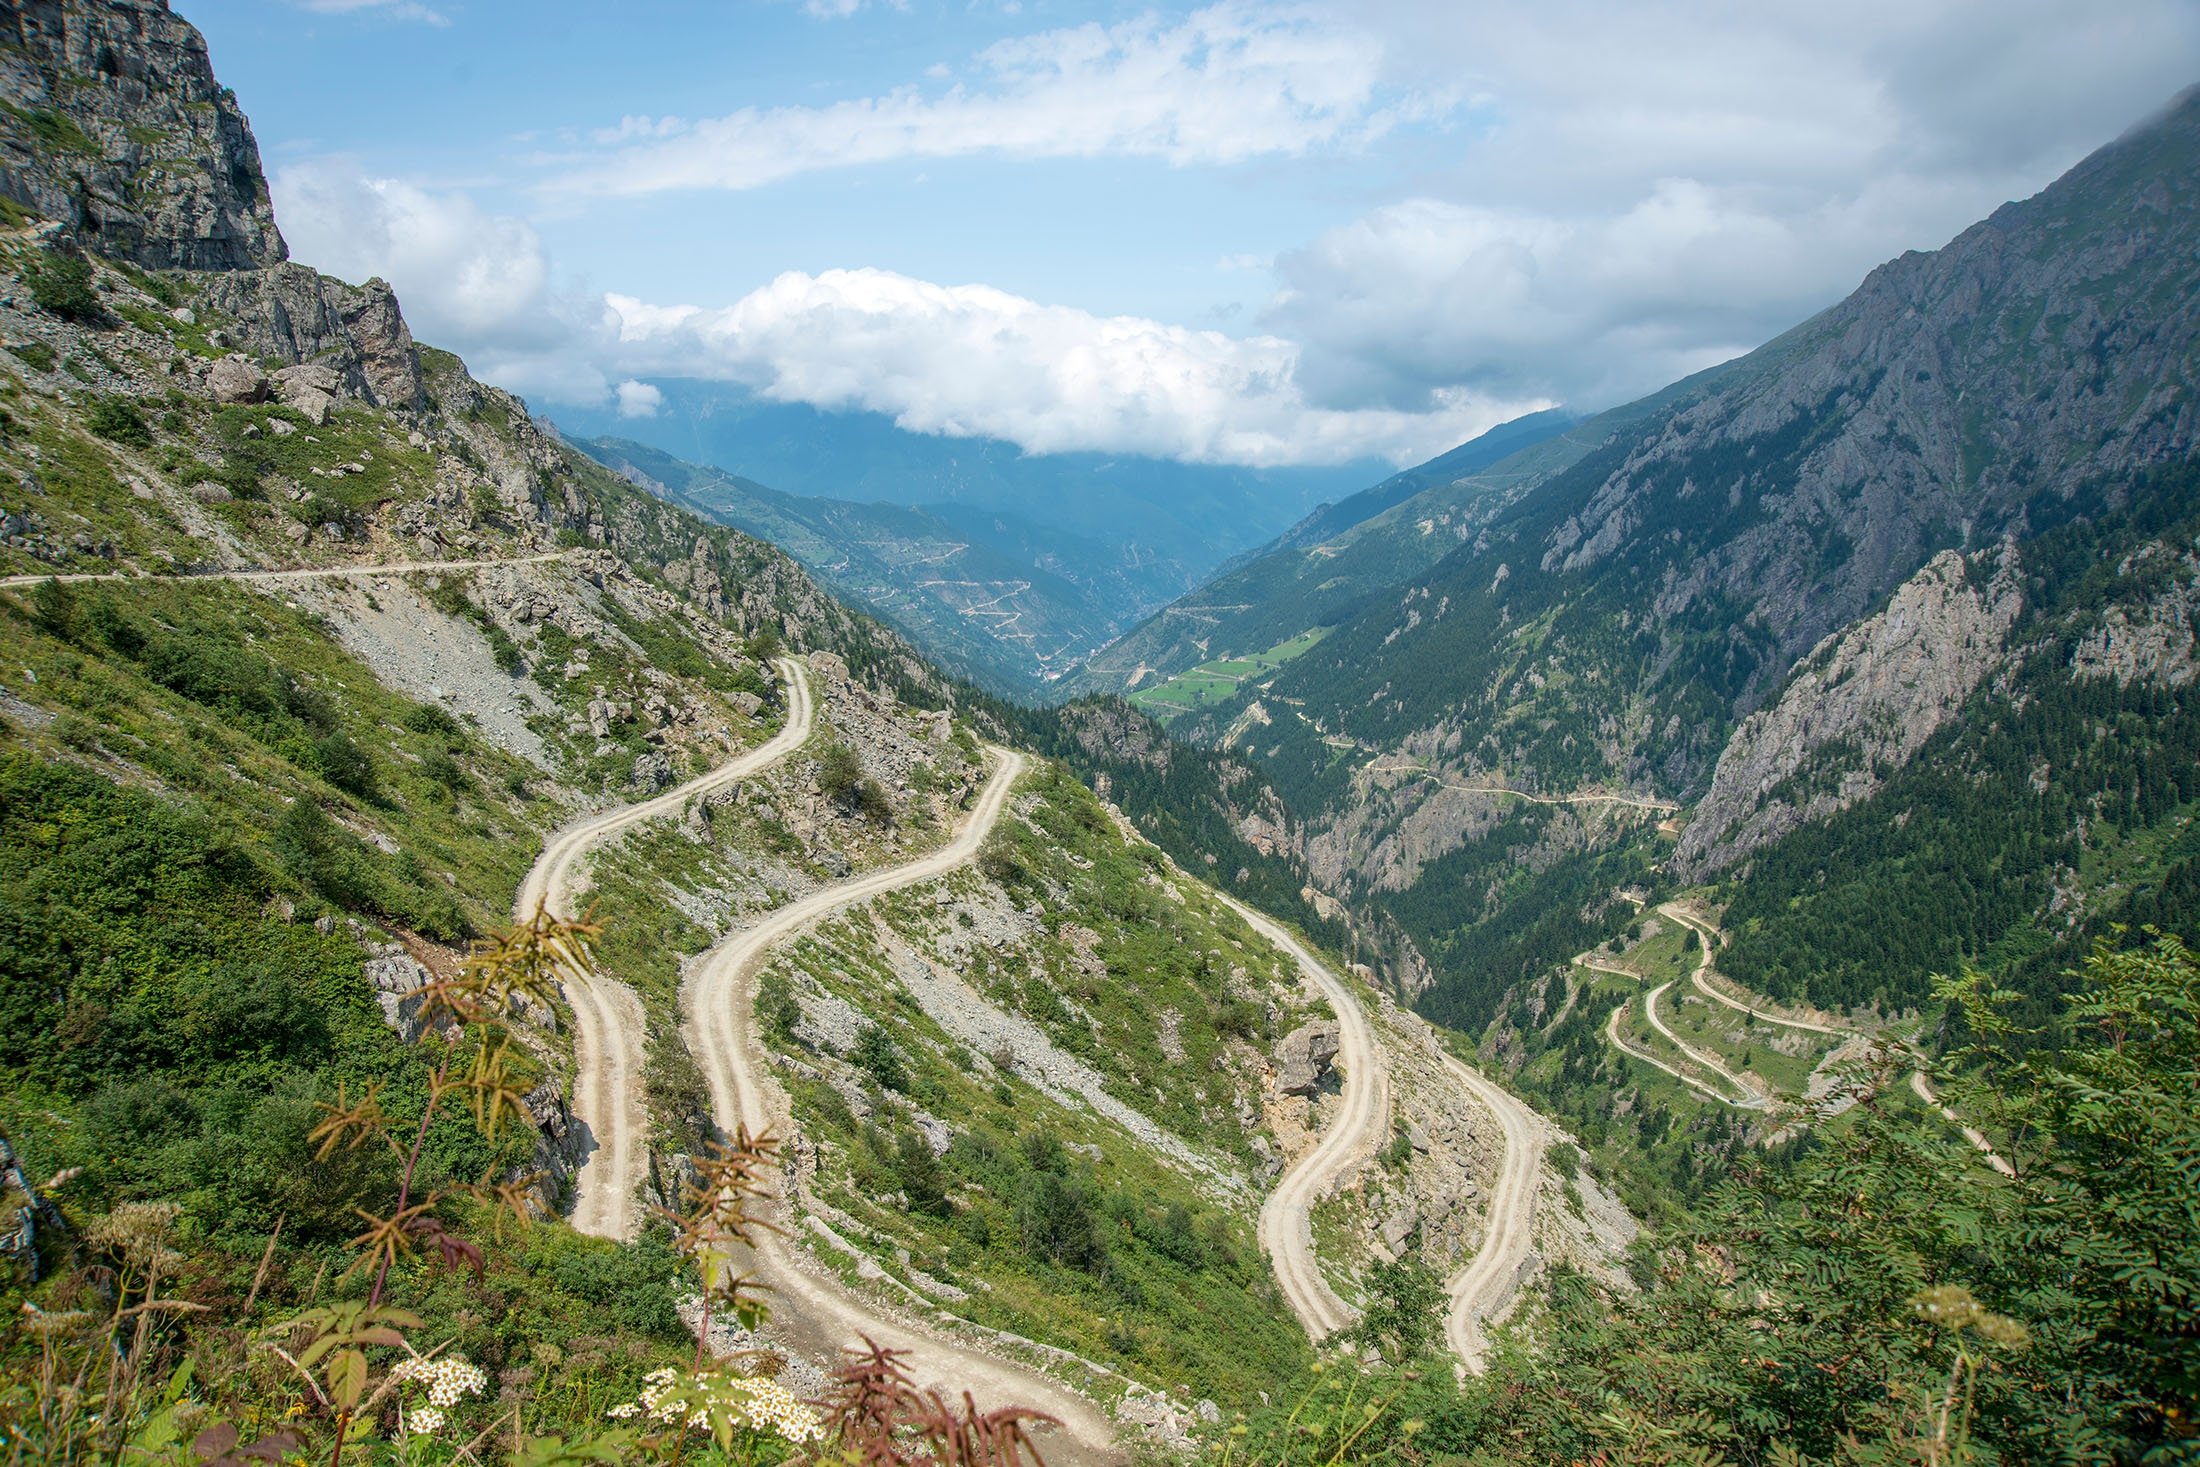 Traversing the Soğanlı Mountain between inland Bayburt and coastal Trabzon provinces, Derebaşı Bends has 13 hairpin bends, said to be impossible to handle in a single maneuver. (Shutterstock Photo)